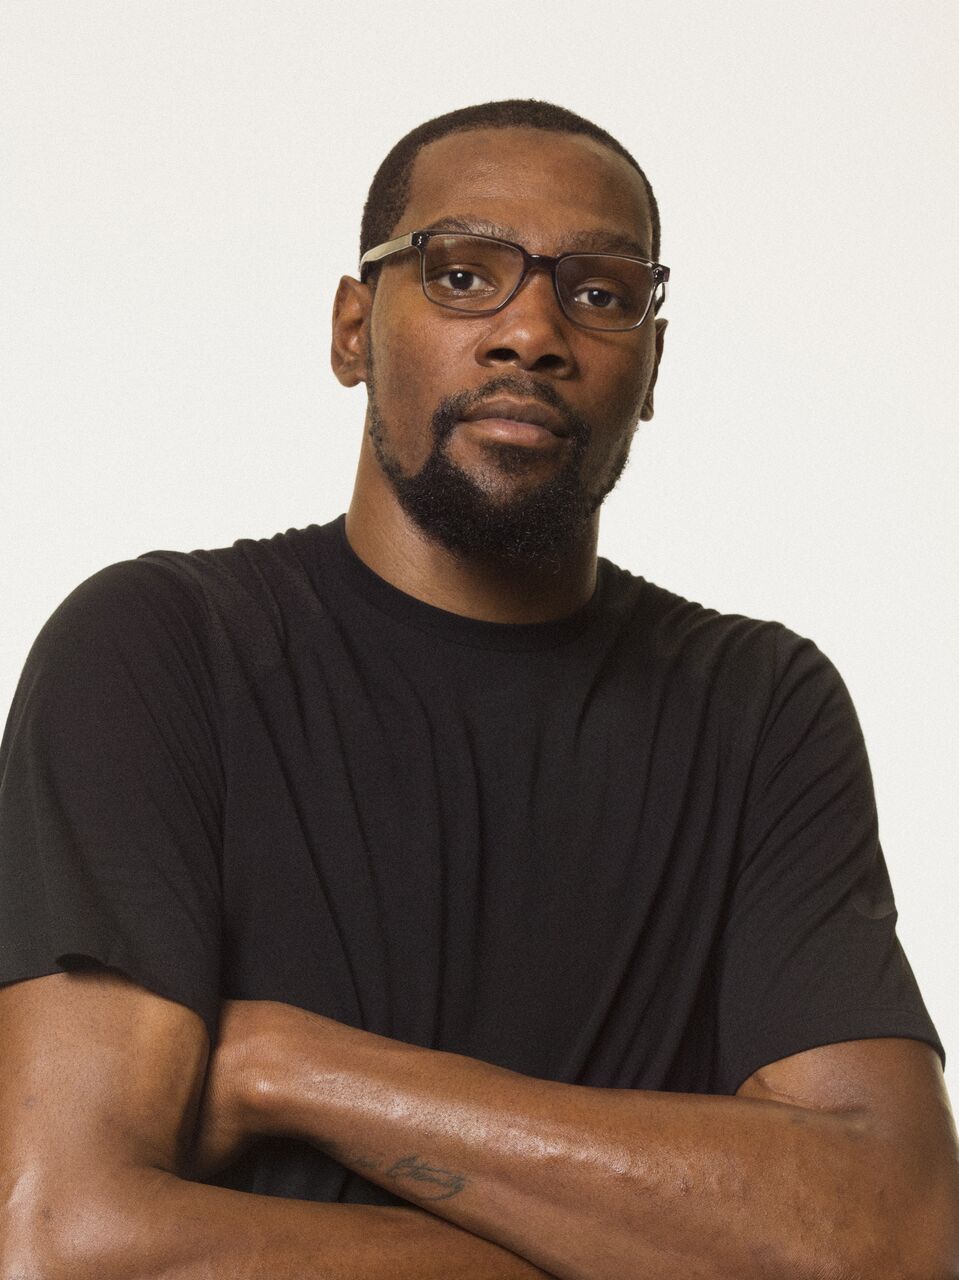 Nike Vision With Kevin Durant 2018 KD Eyewear Collection - RESPECT. | The Photo Journal of Hip-Hop Culture